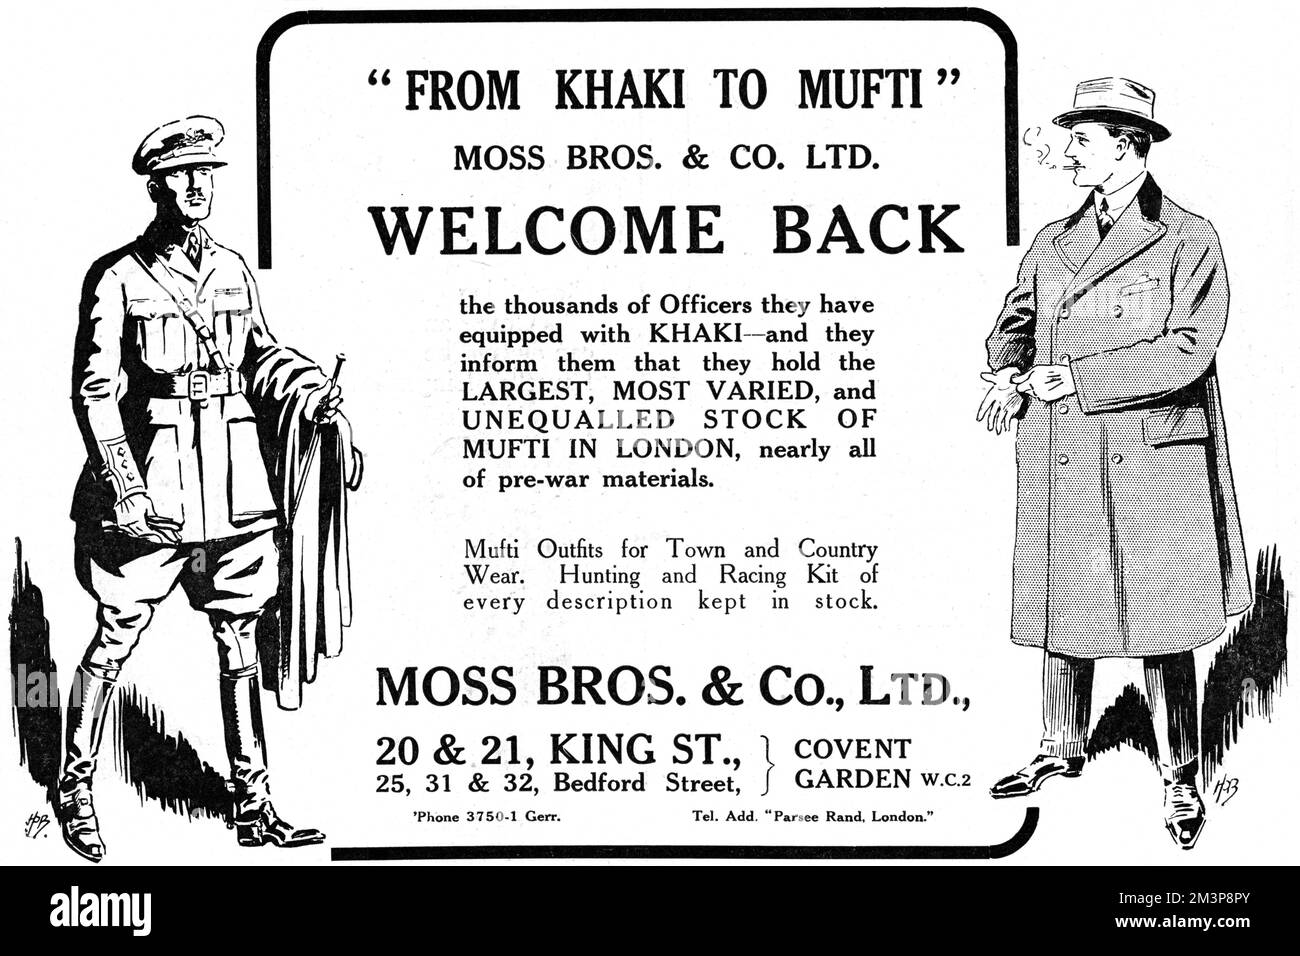 An advertisement from men's outfitters, Moss Bros, highlighting the transition of men's clothign from uniform back to civilian now that the war had ended.  The firm welcomes back, 'the thousands of Officers they have equipped with khaki - and they inform them that they hold the largest, most varied, and unequalled stock of mufti in London.'     Date: 1918 Stock Photo